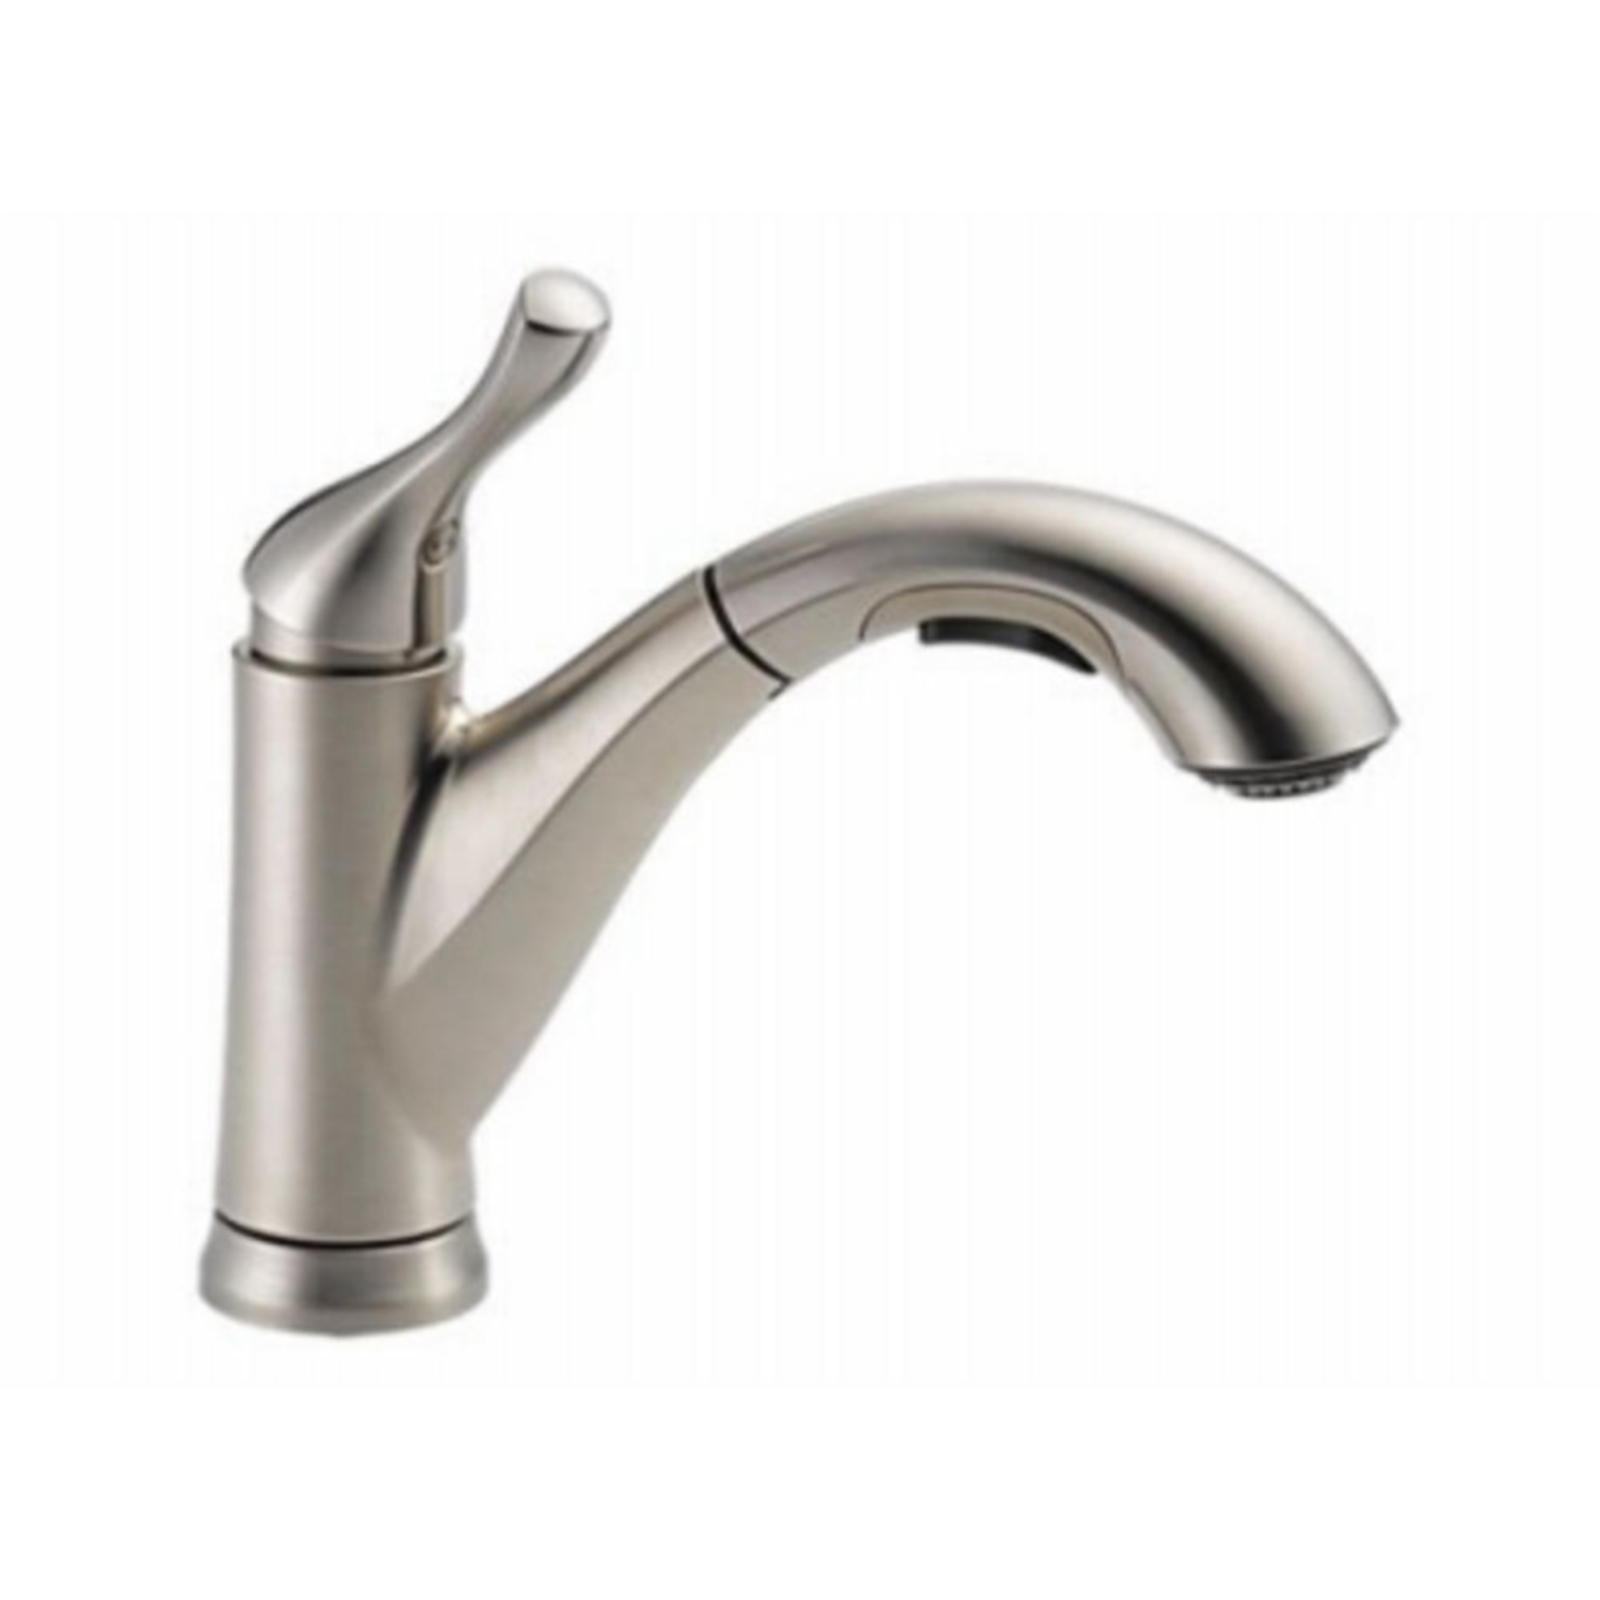 Delta Faucet Grant Metal Single Handle Pull-Out Spray Kitchen Faucet - Stainless Steel